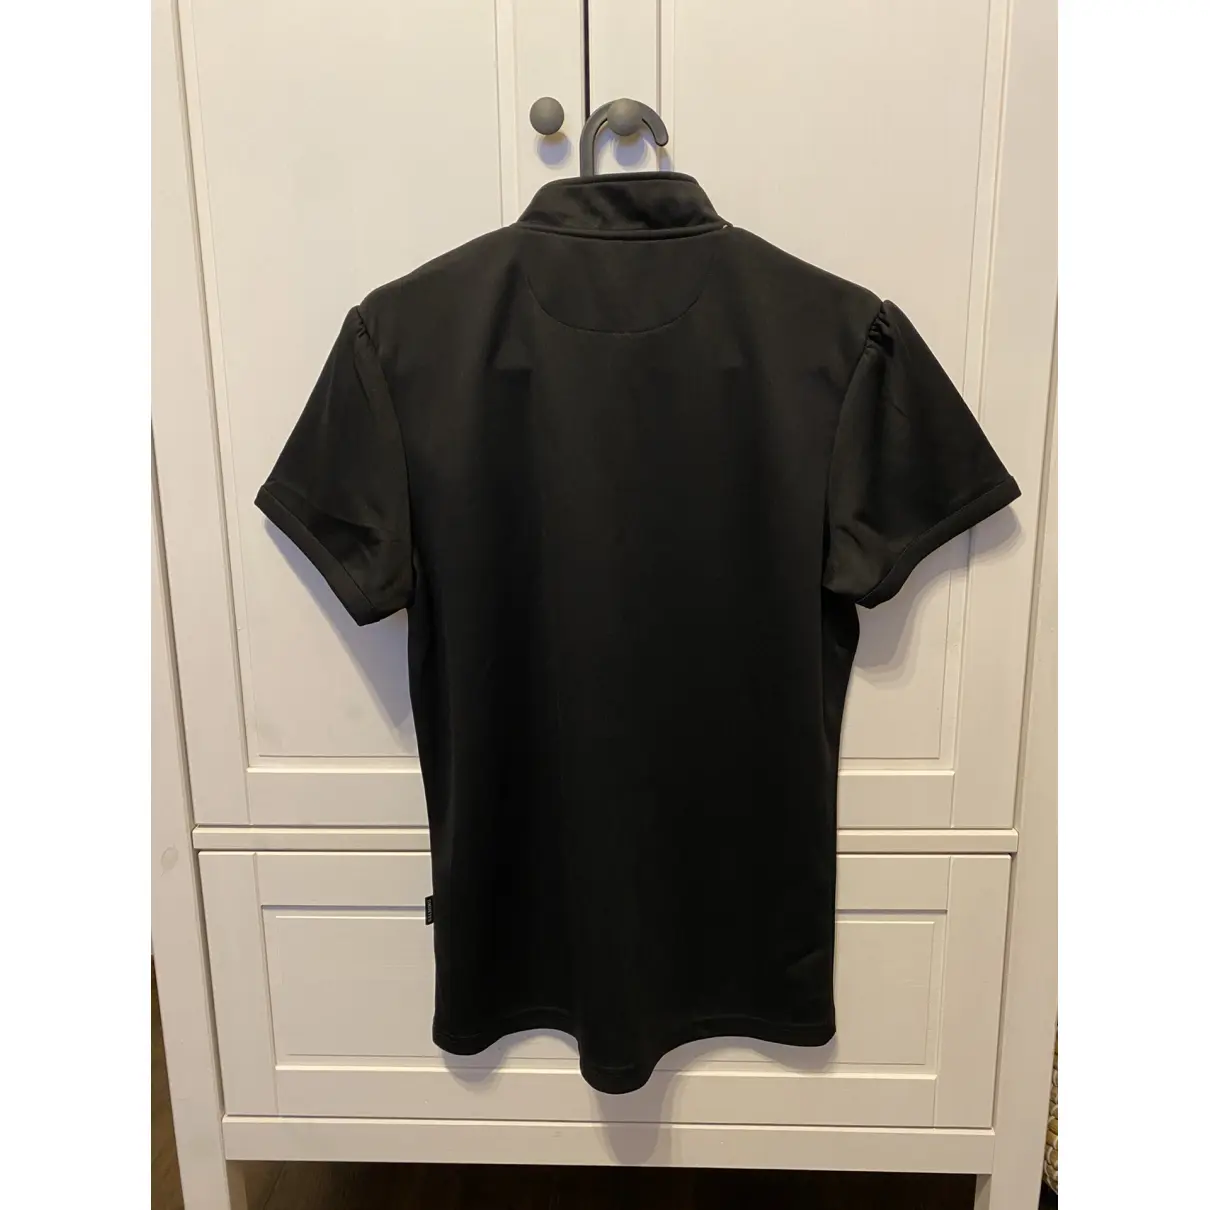 Buy Salming Polo online